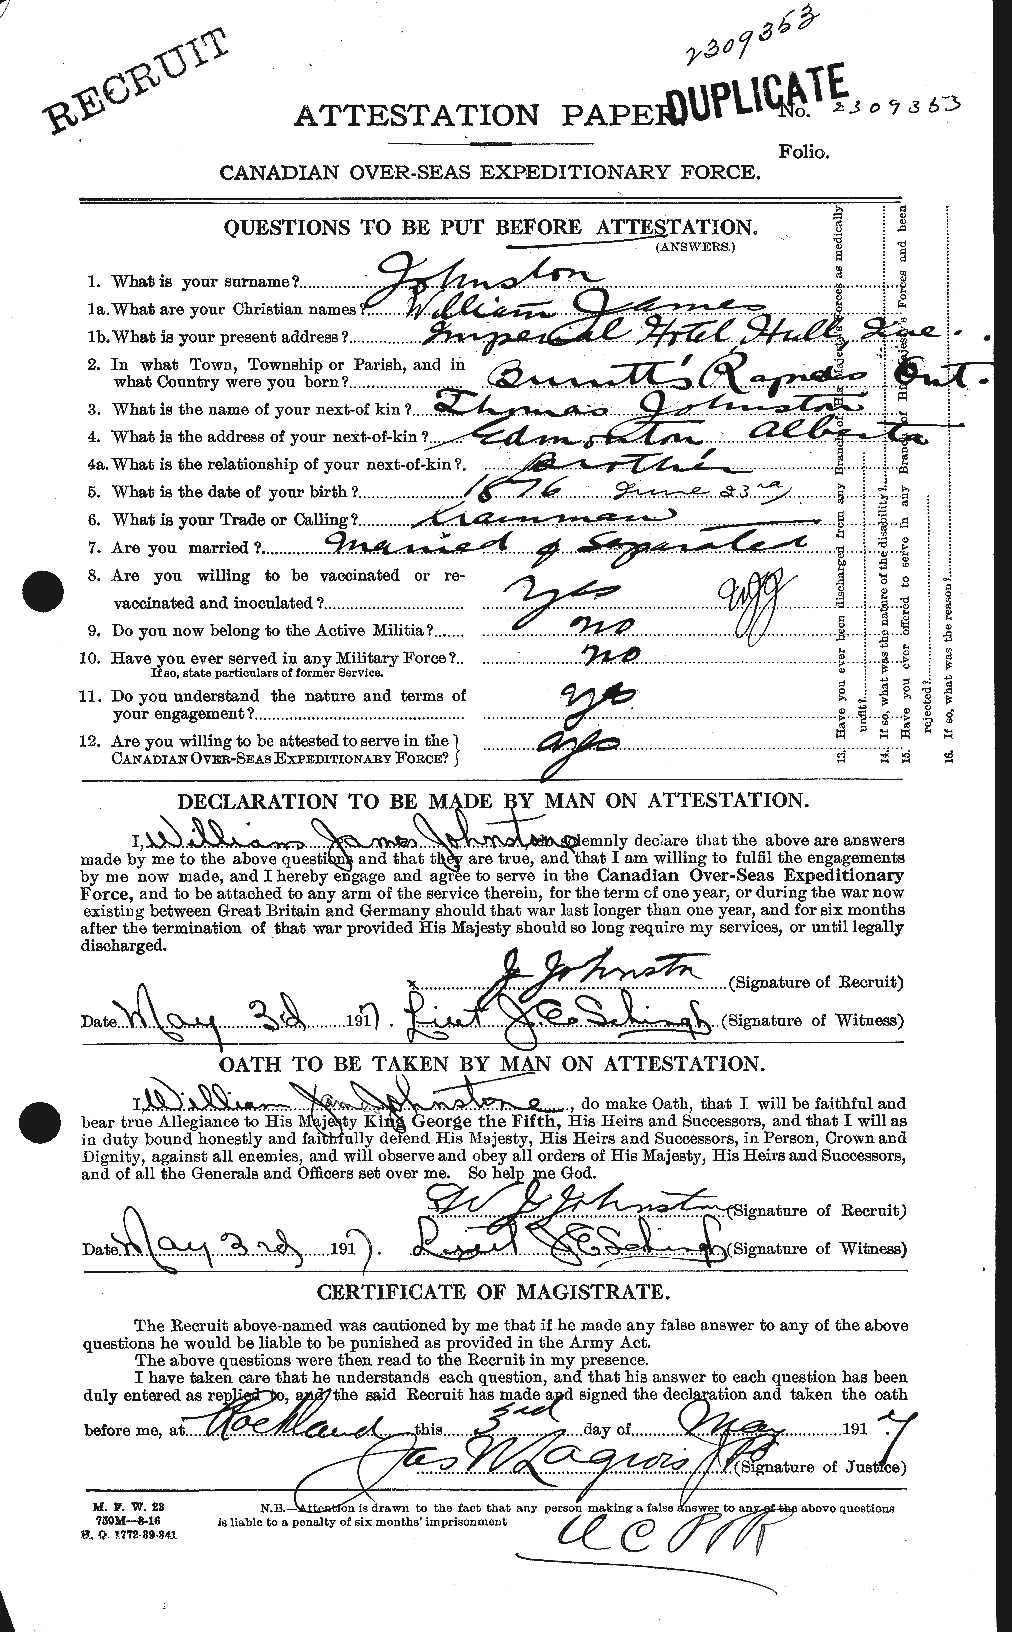 Personnel Records of the First World War - CEF 427358a